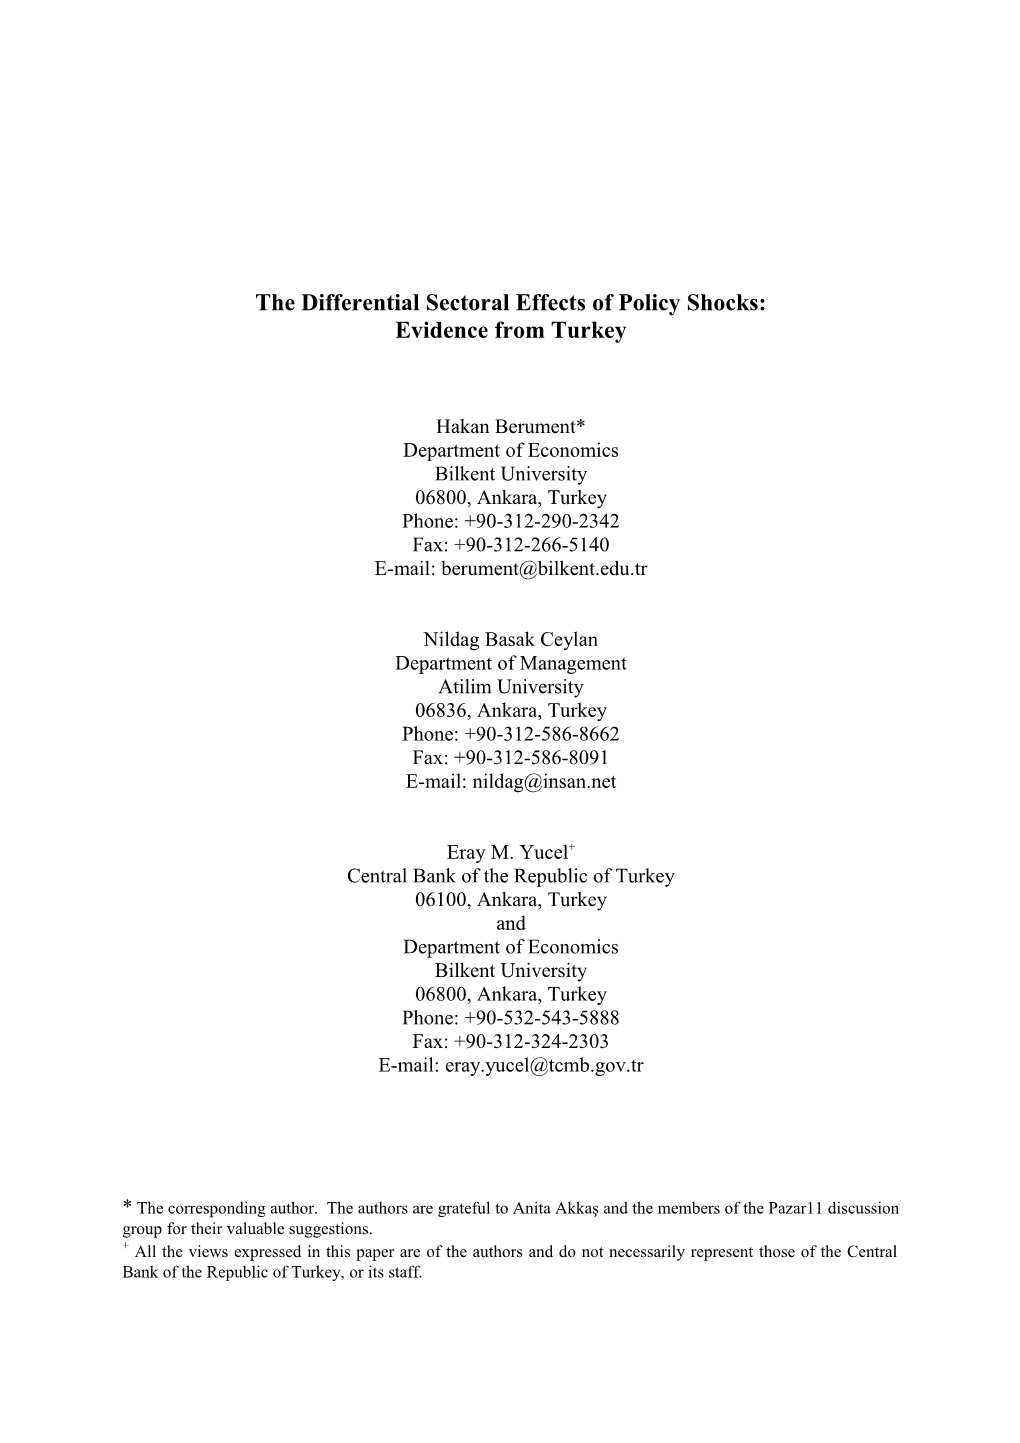 The Differential Sectoral Effects of Policy Shocks